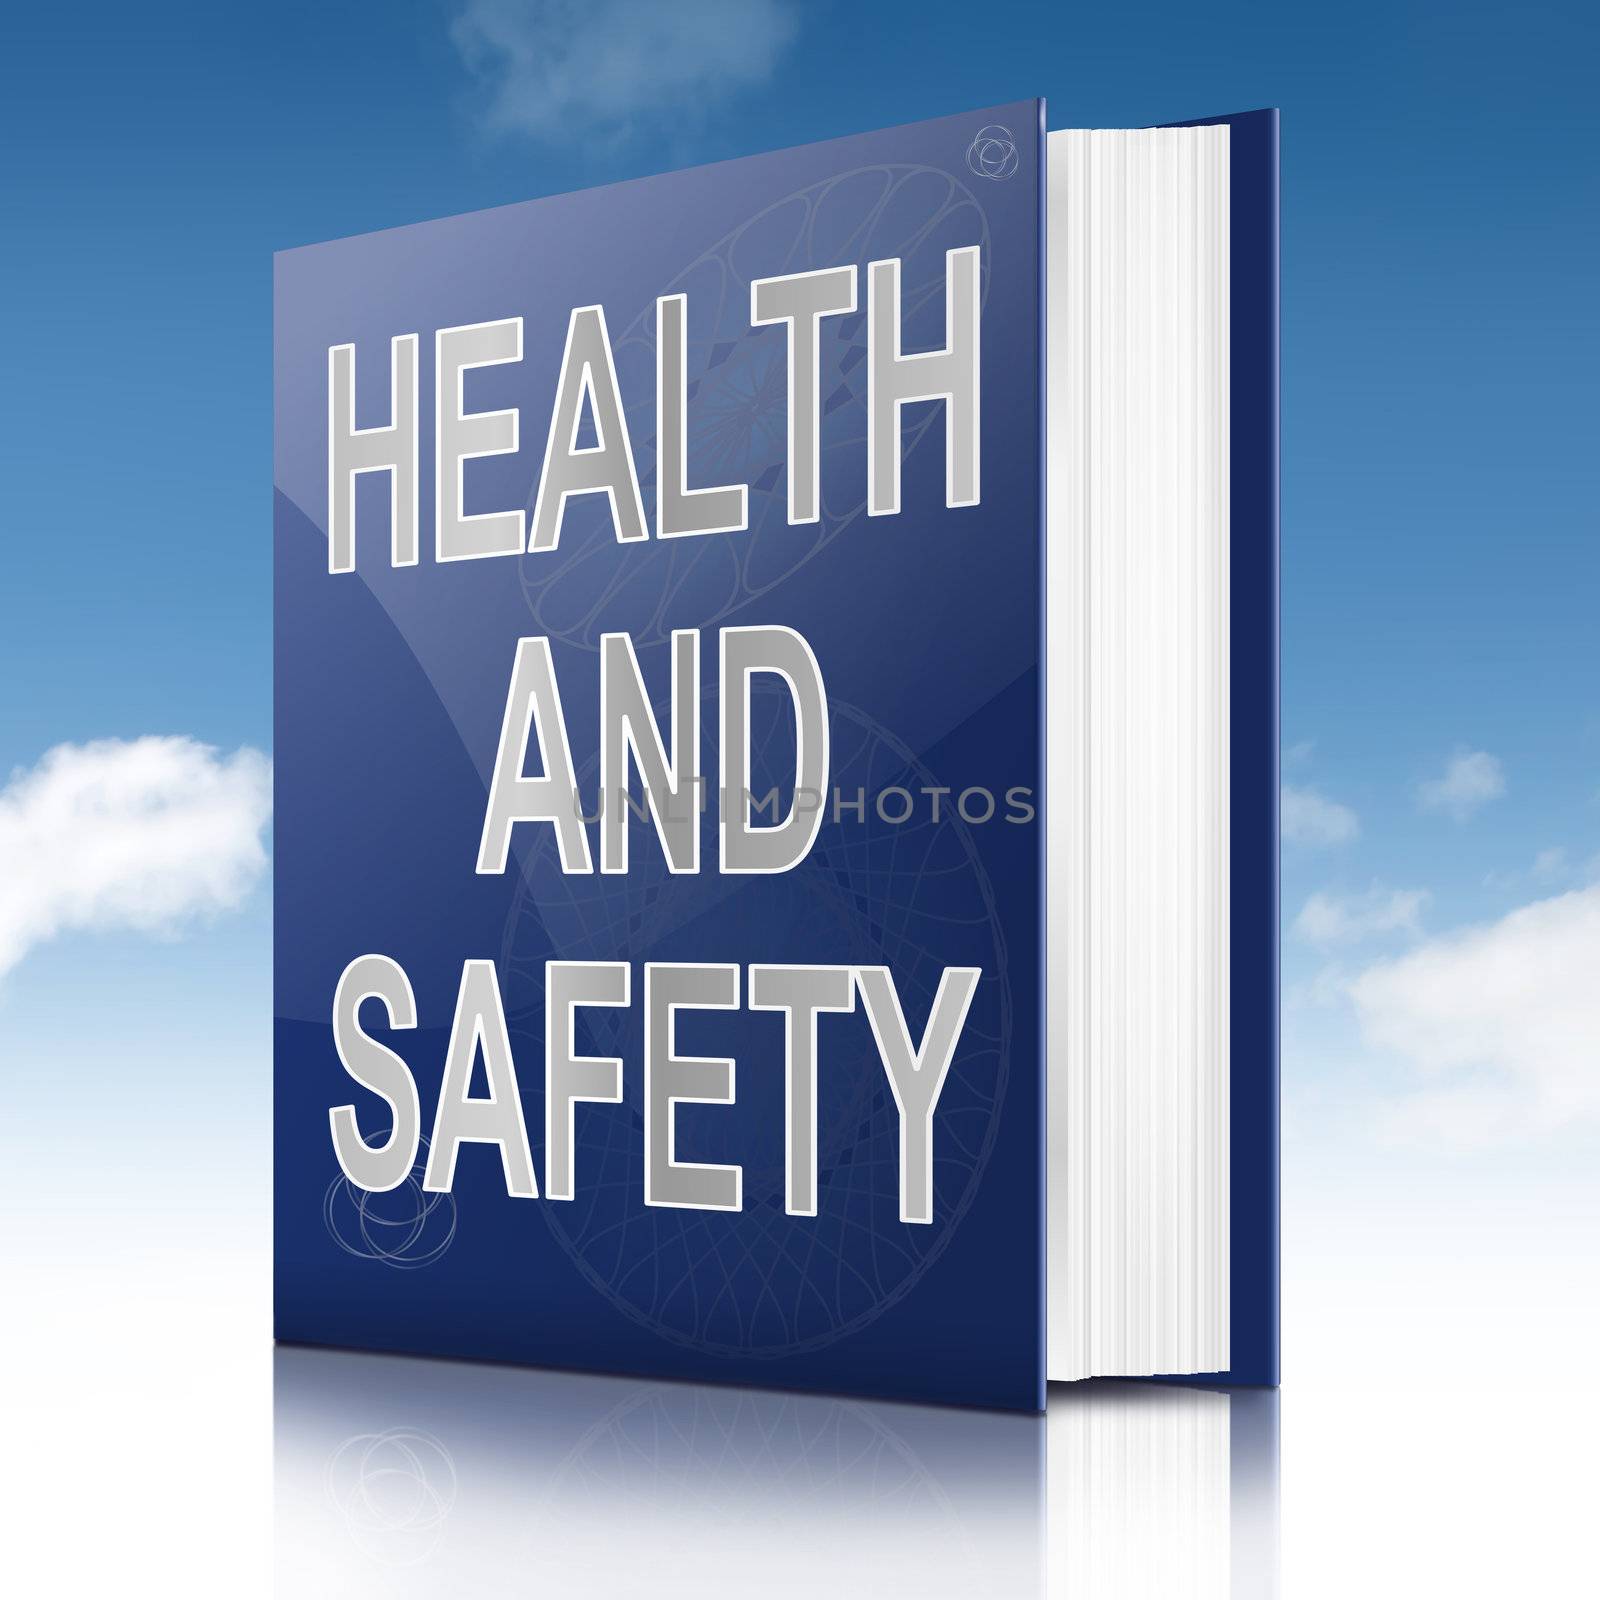 Illustration depicting a text book with a health and safety concept title. Sky background.